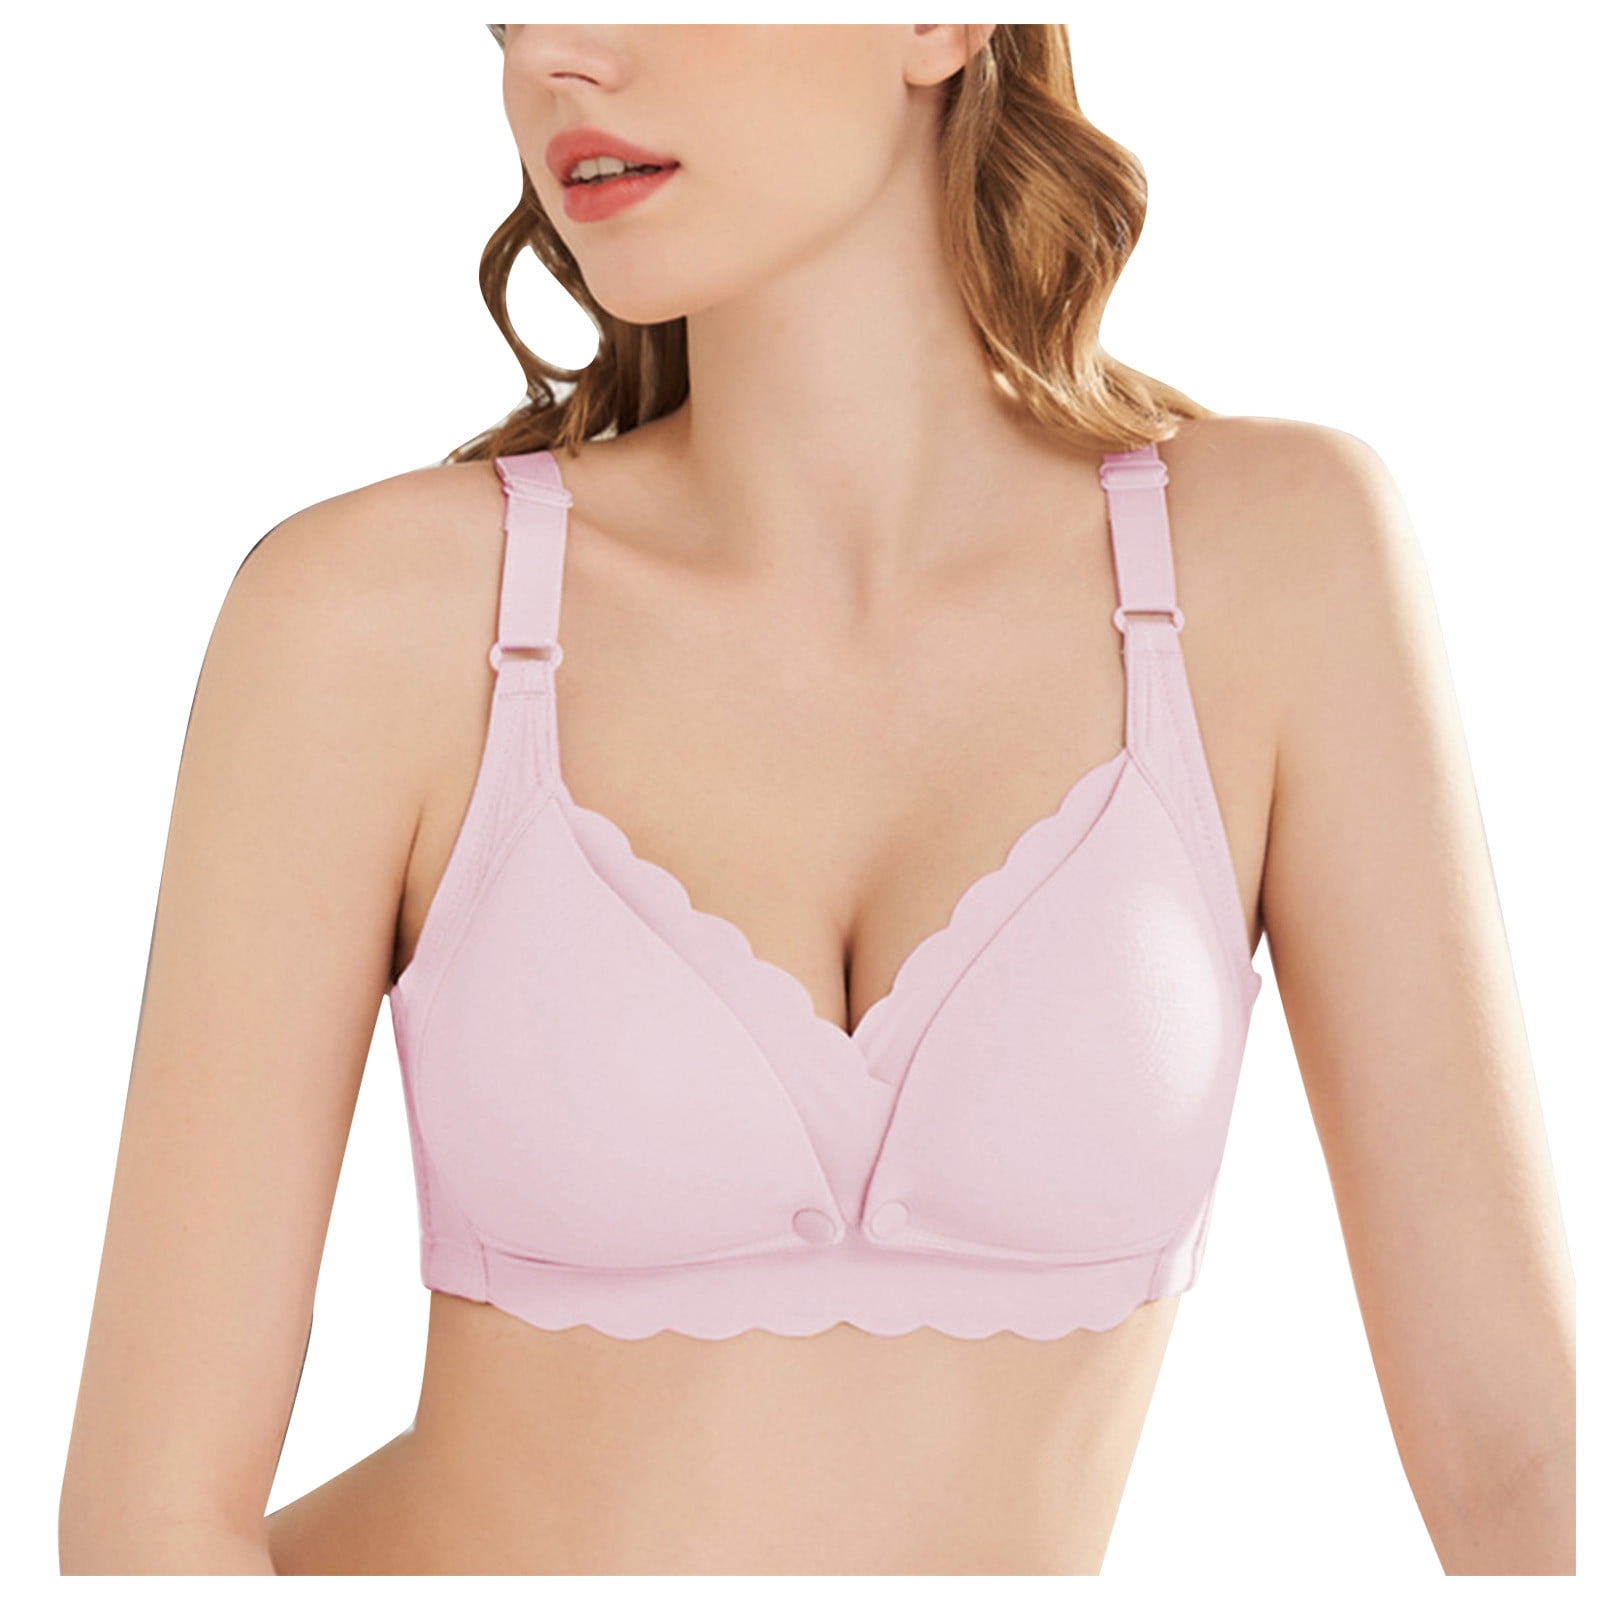 adviicd Under Outfit Bras for Women Women's Smoothing Seamless Balcony Bra  Pink 75B 